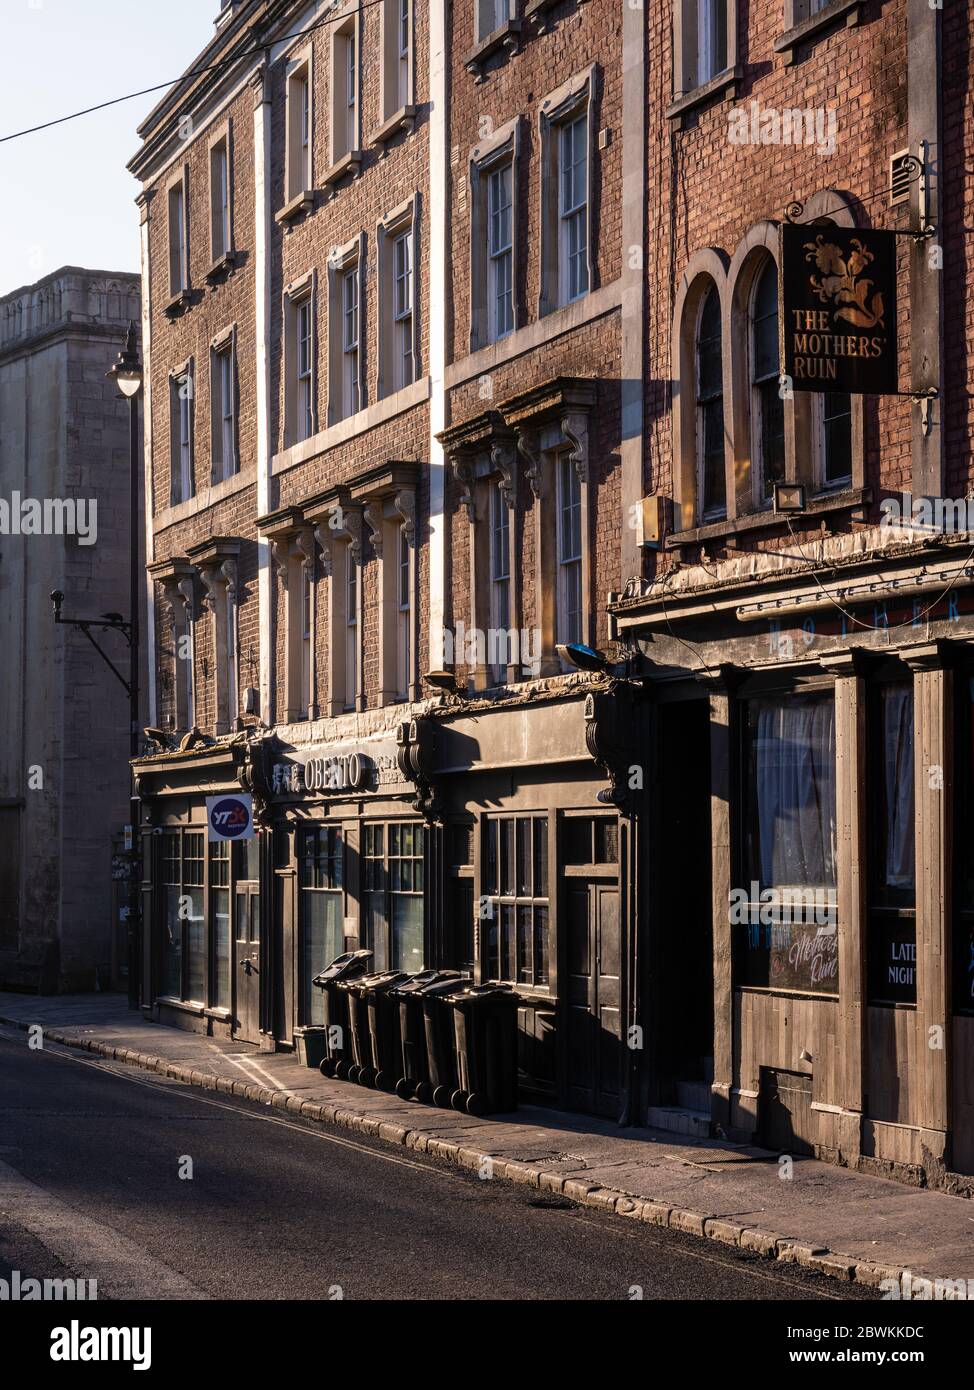 Bristol, England, UK - May 25, 2020: Morning sun shines on traditional buildings on St Nicholas Street in Bristol's old city centre. Stock Photo